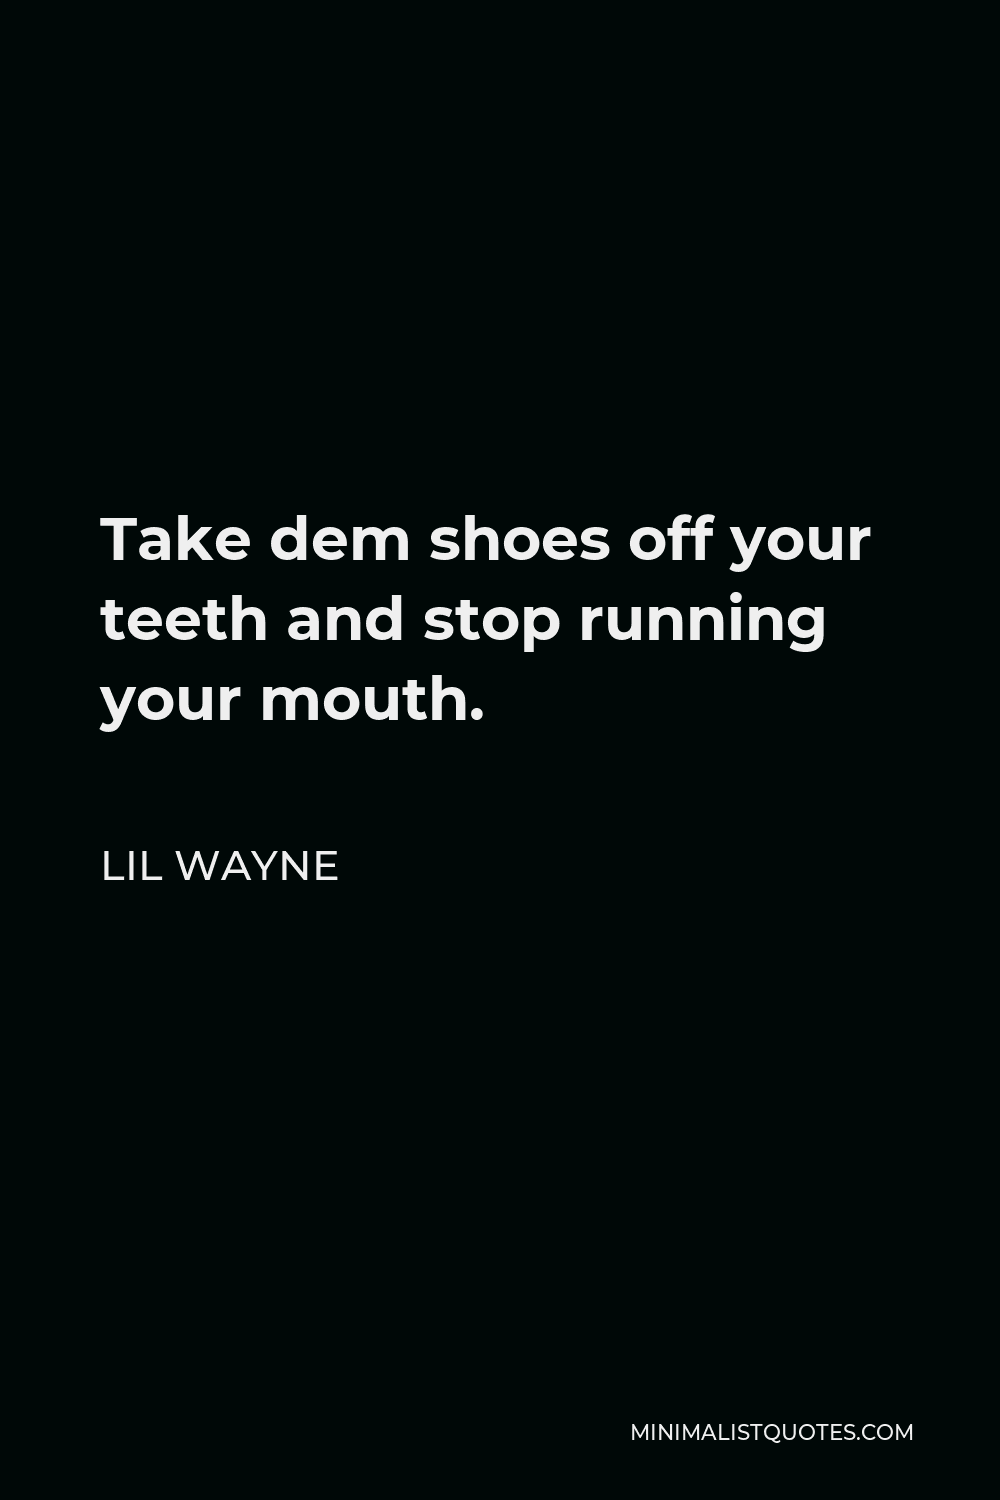 Lil Wayne Quote - Take dem shoes off your teeth and stop running your mouth.